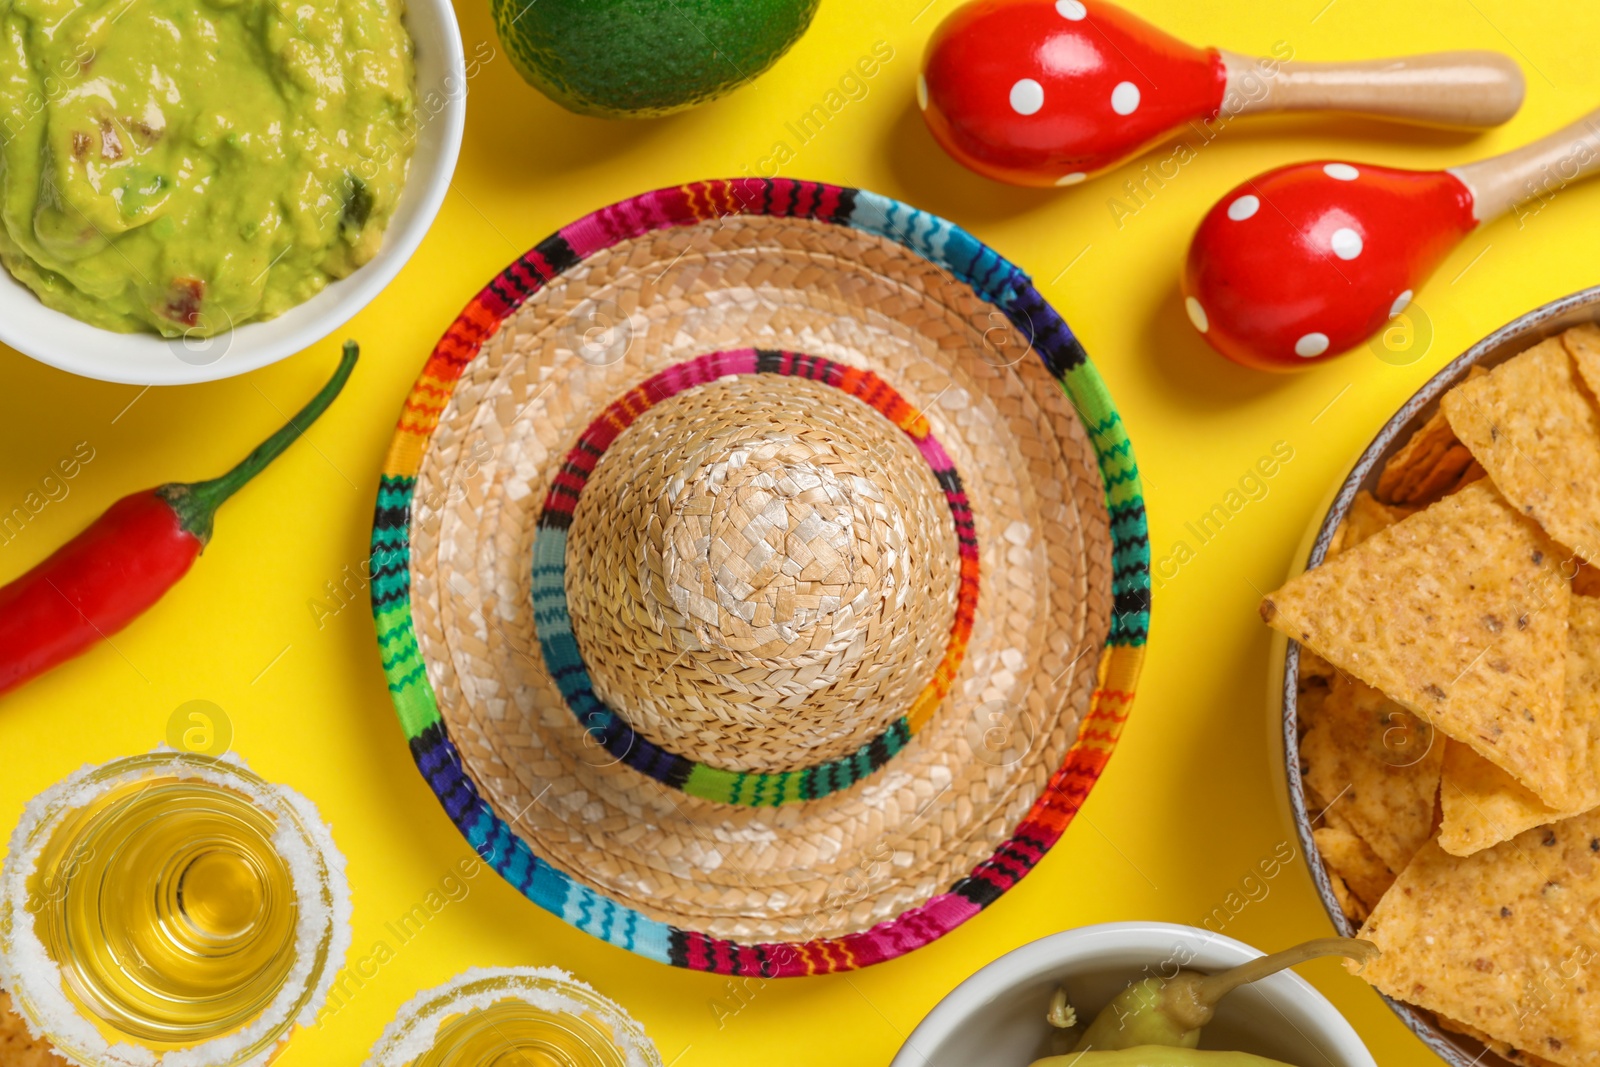 Photo of Mexican sombrero hat, tequila, nachos chips, guacamole and maracas on yellow background, flat lay